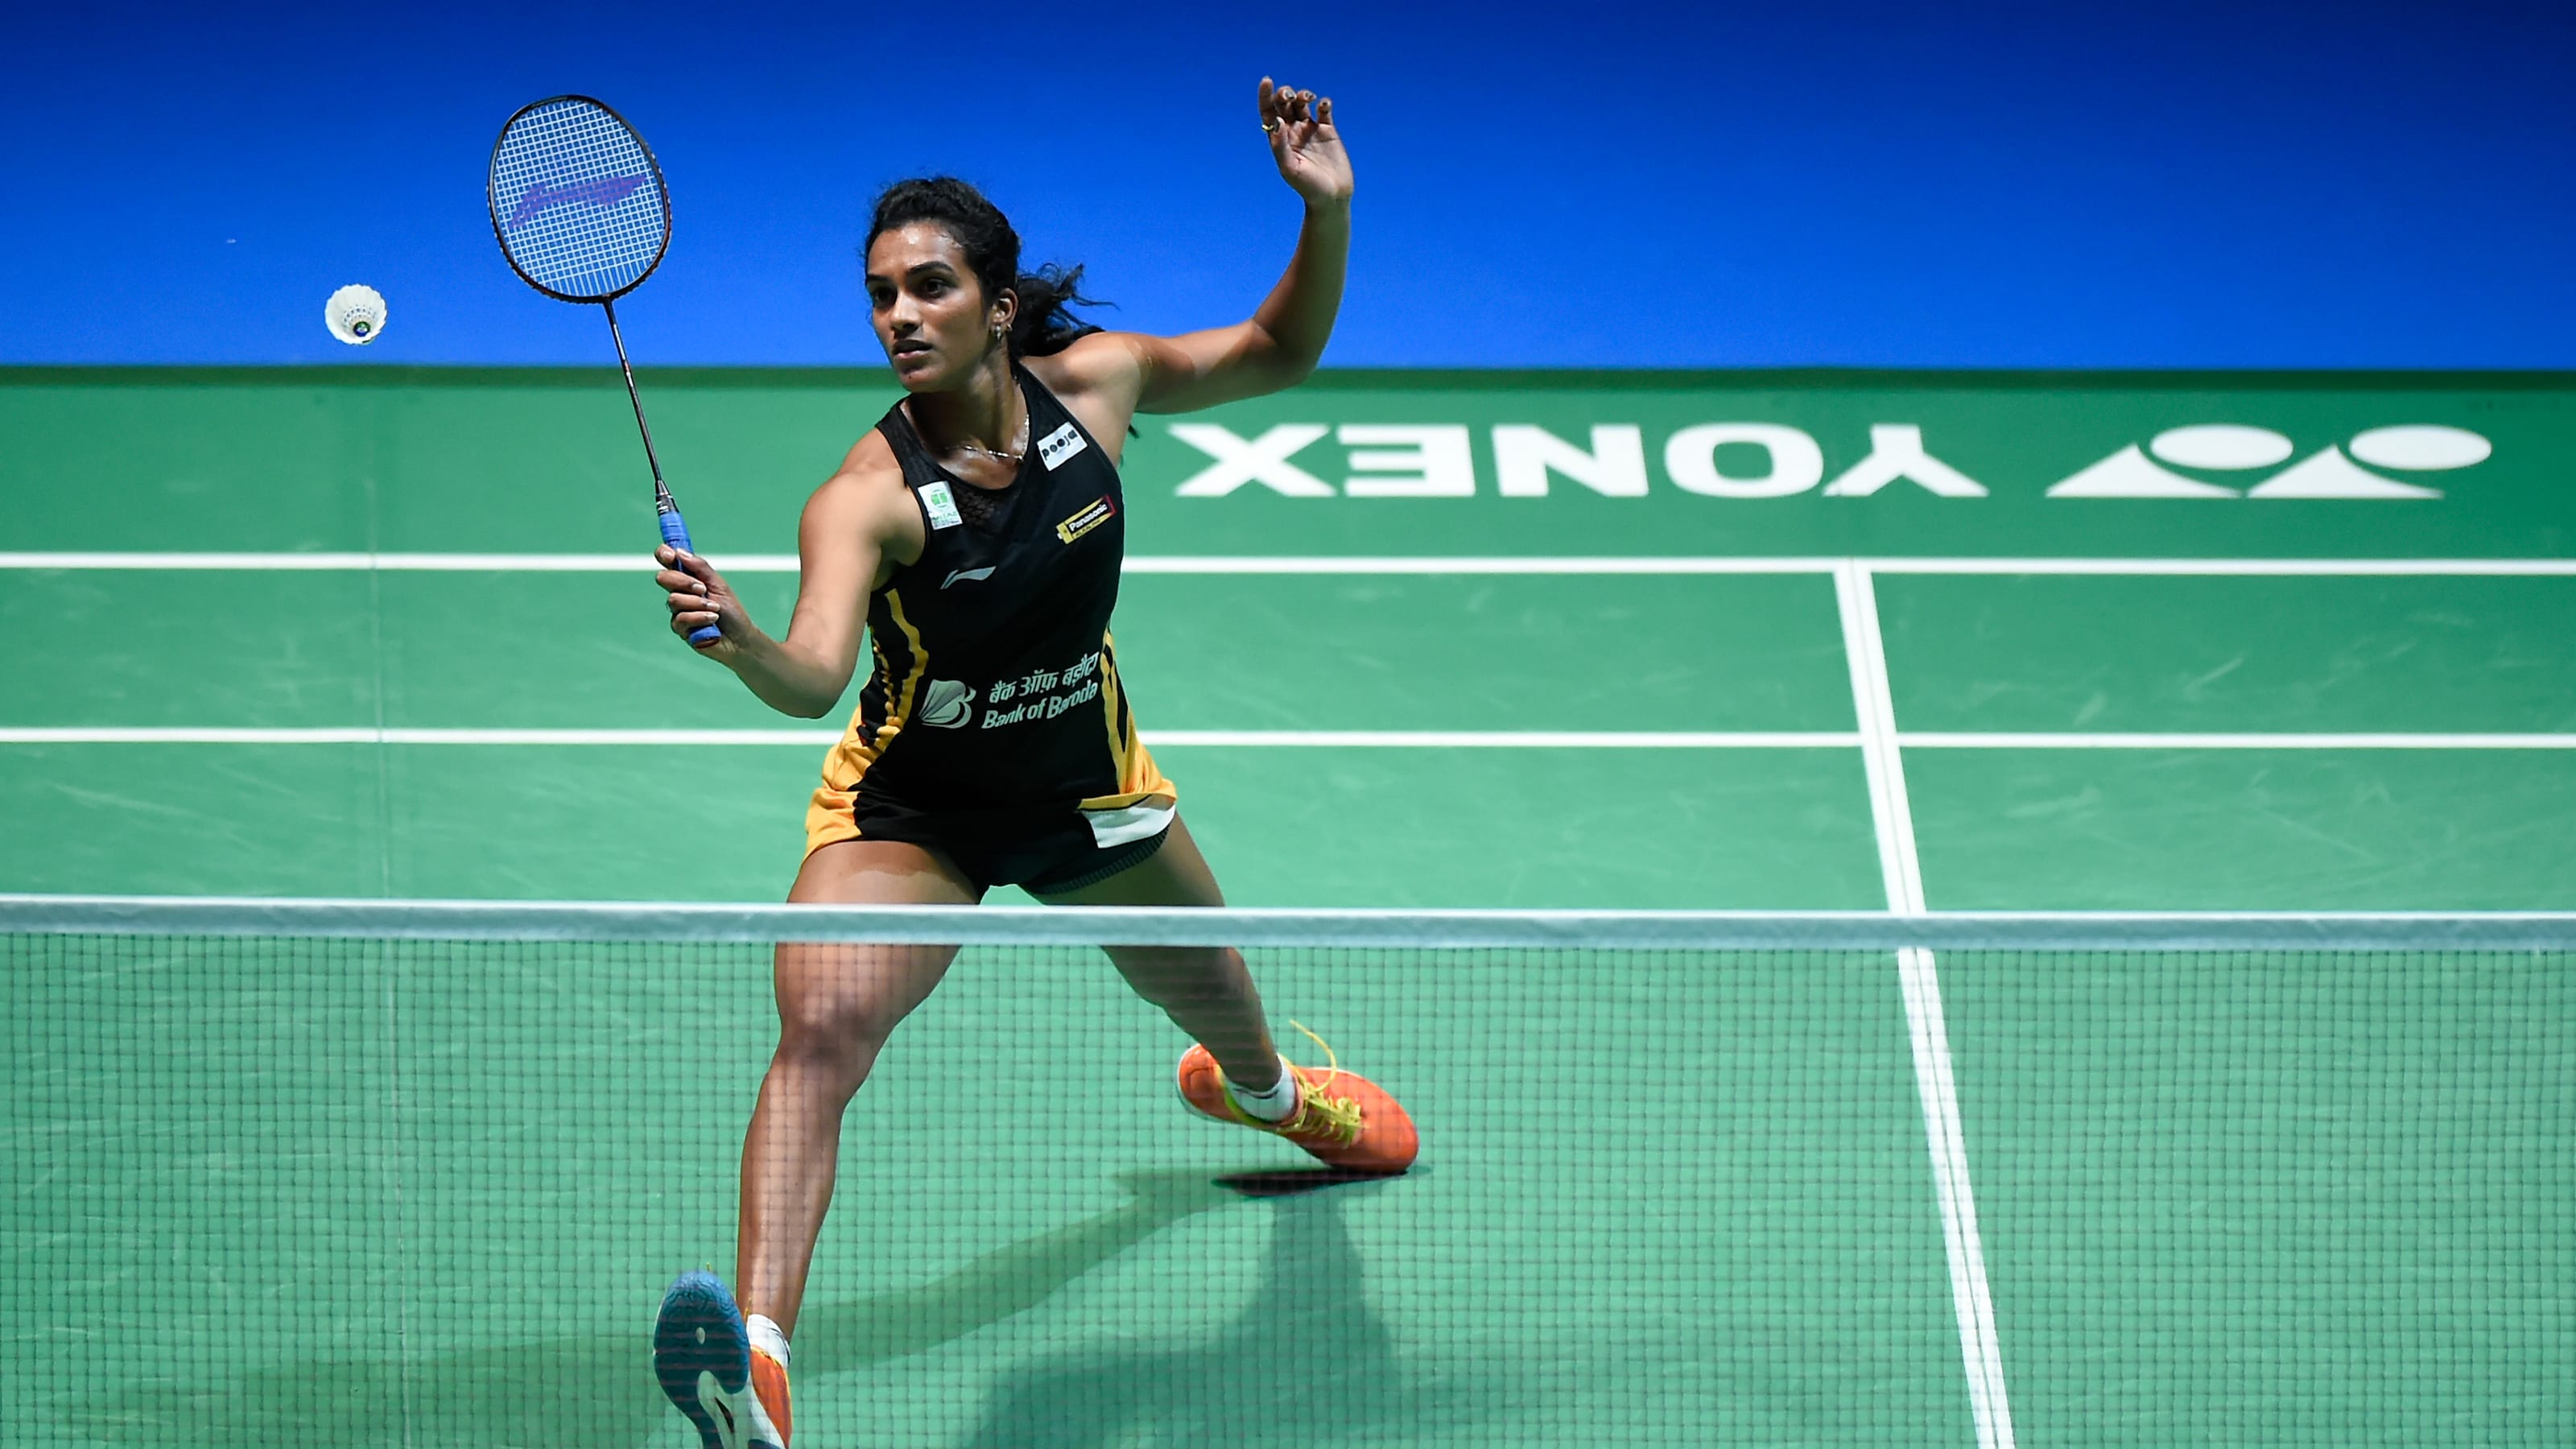 Swiss Open 21 Badminton Draw Get Full Schedule For Pv Sindhu Saina Nehwal And Other Indian Shuttlers